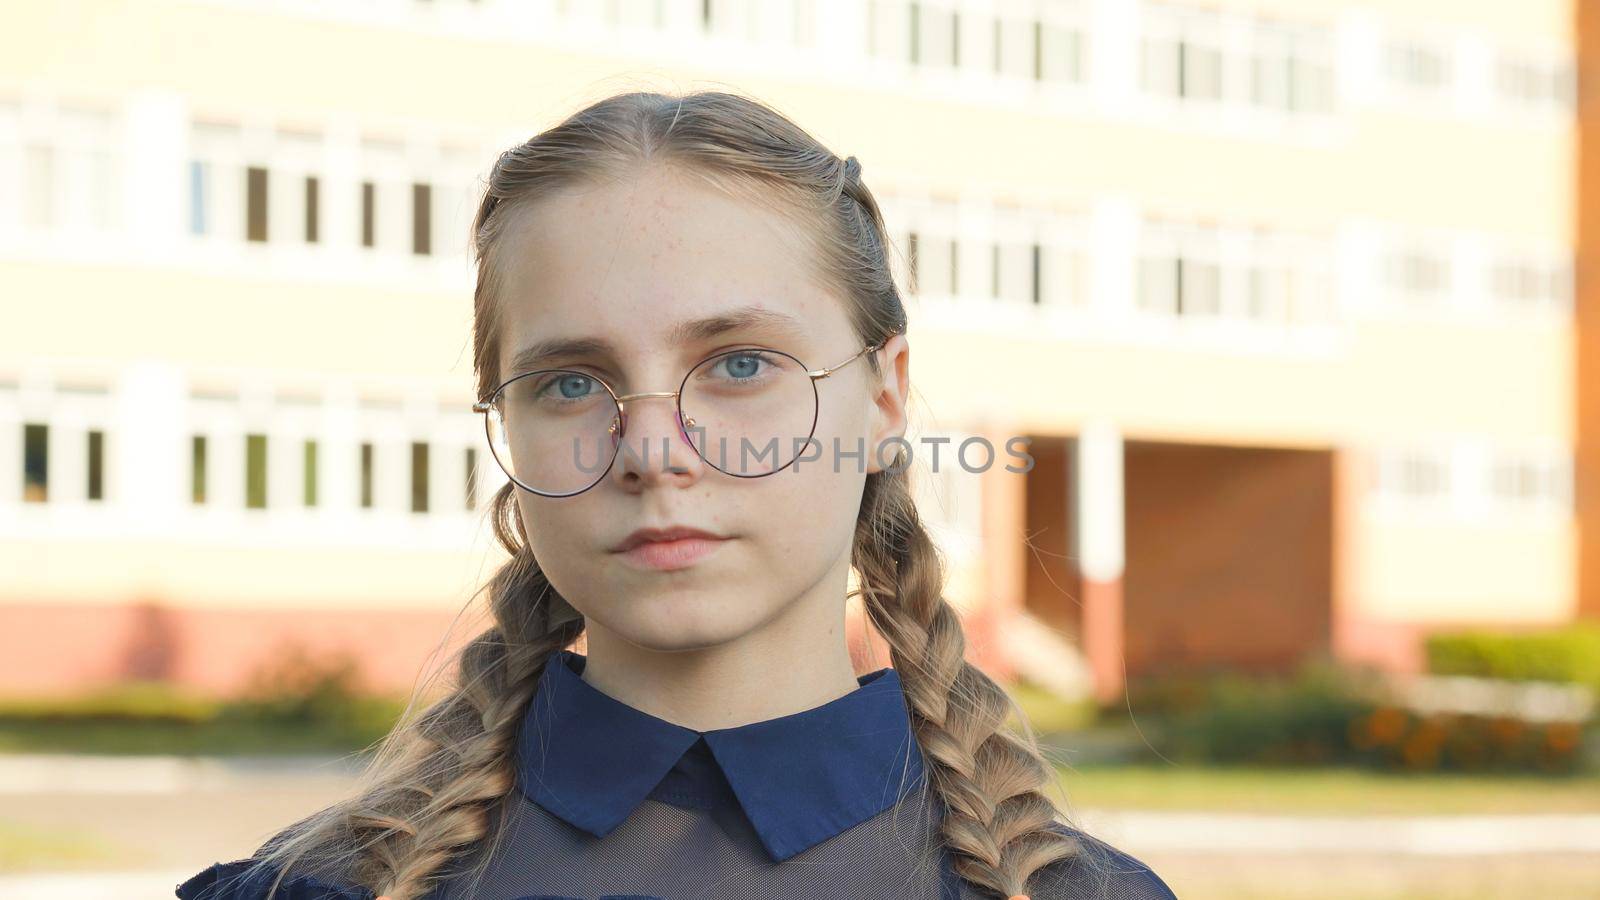 A teenage girl wearing glasses in front of a school